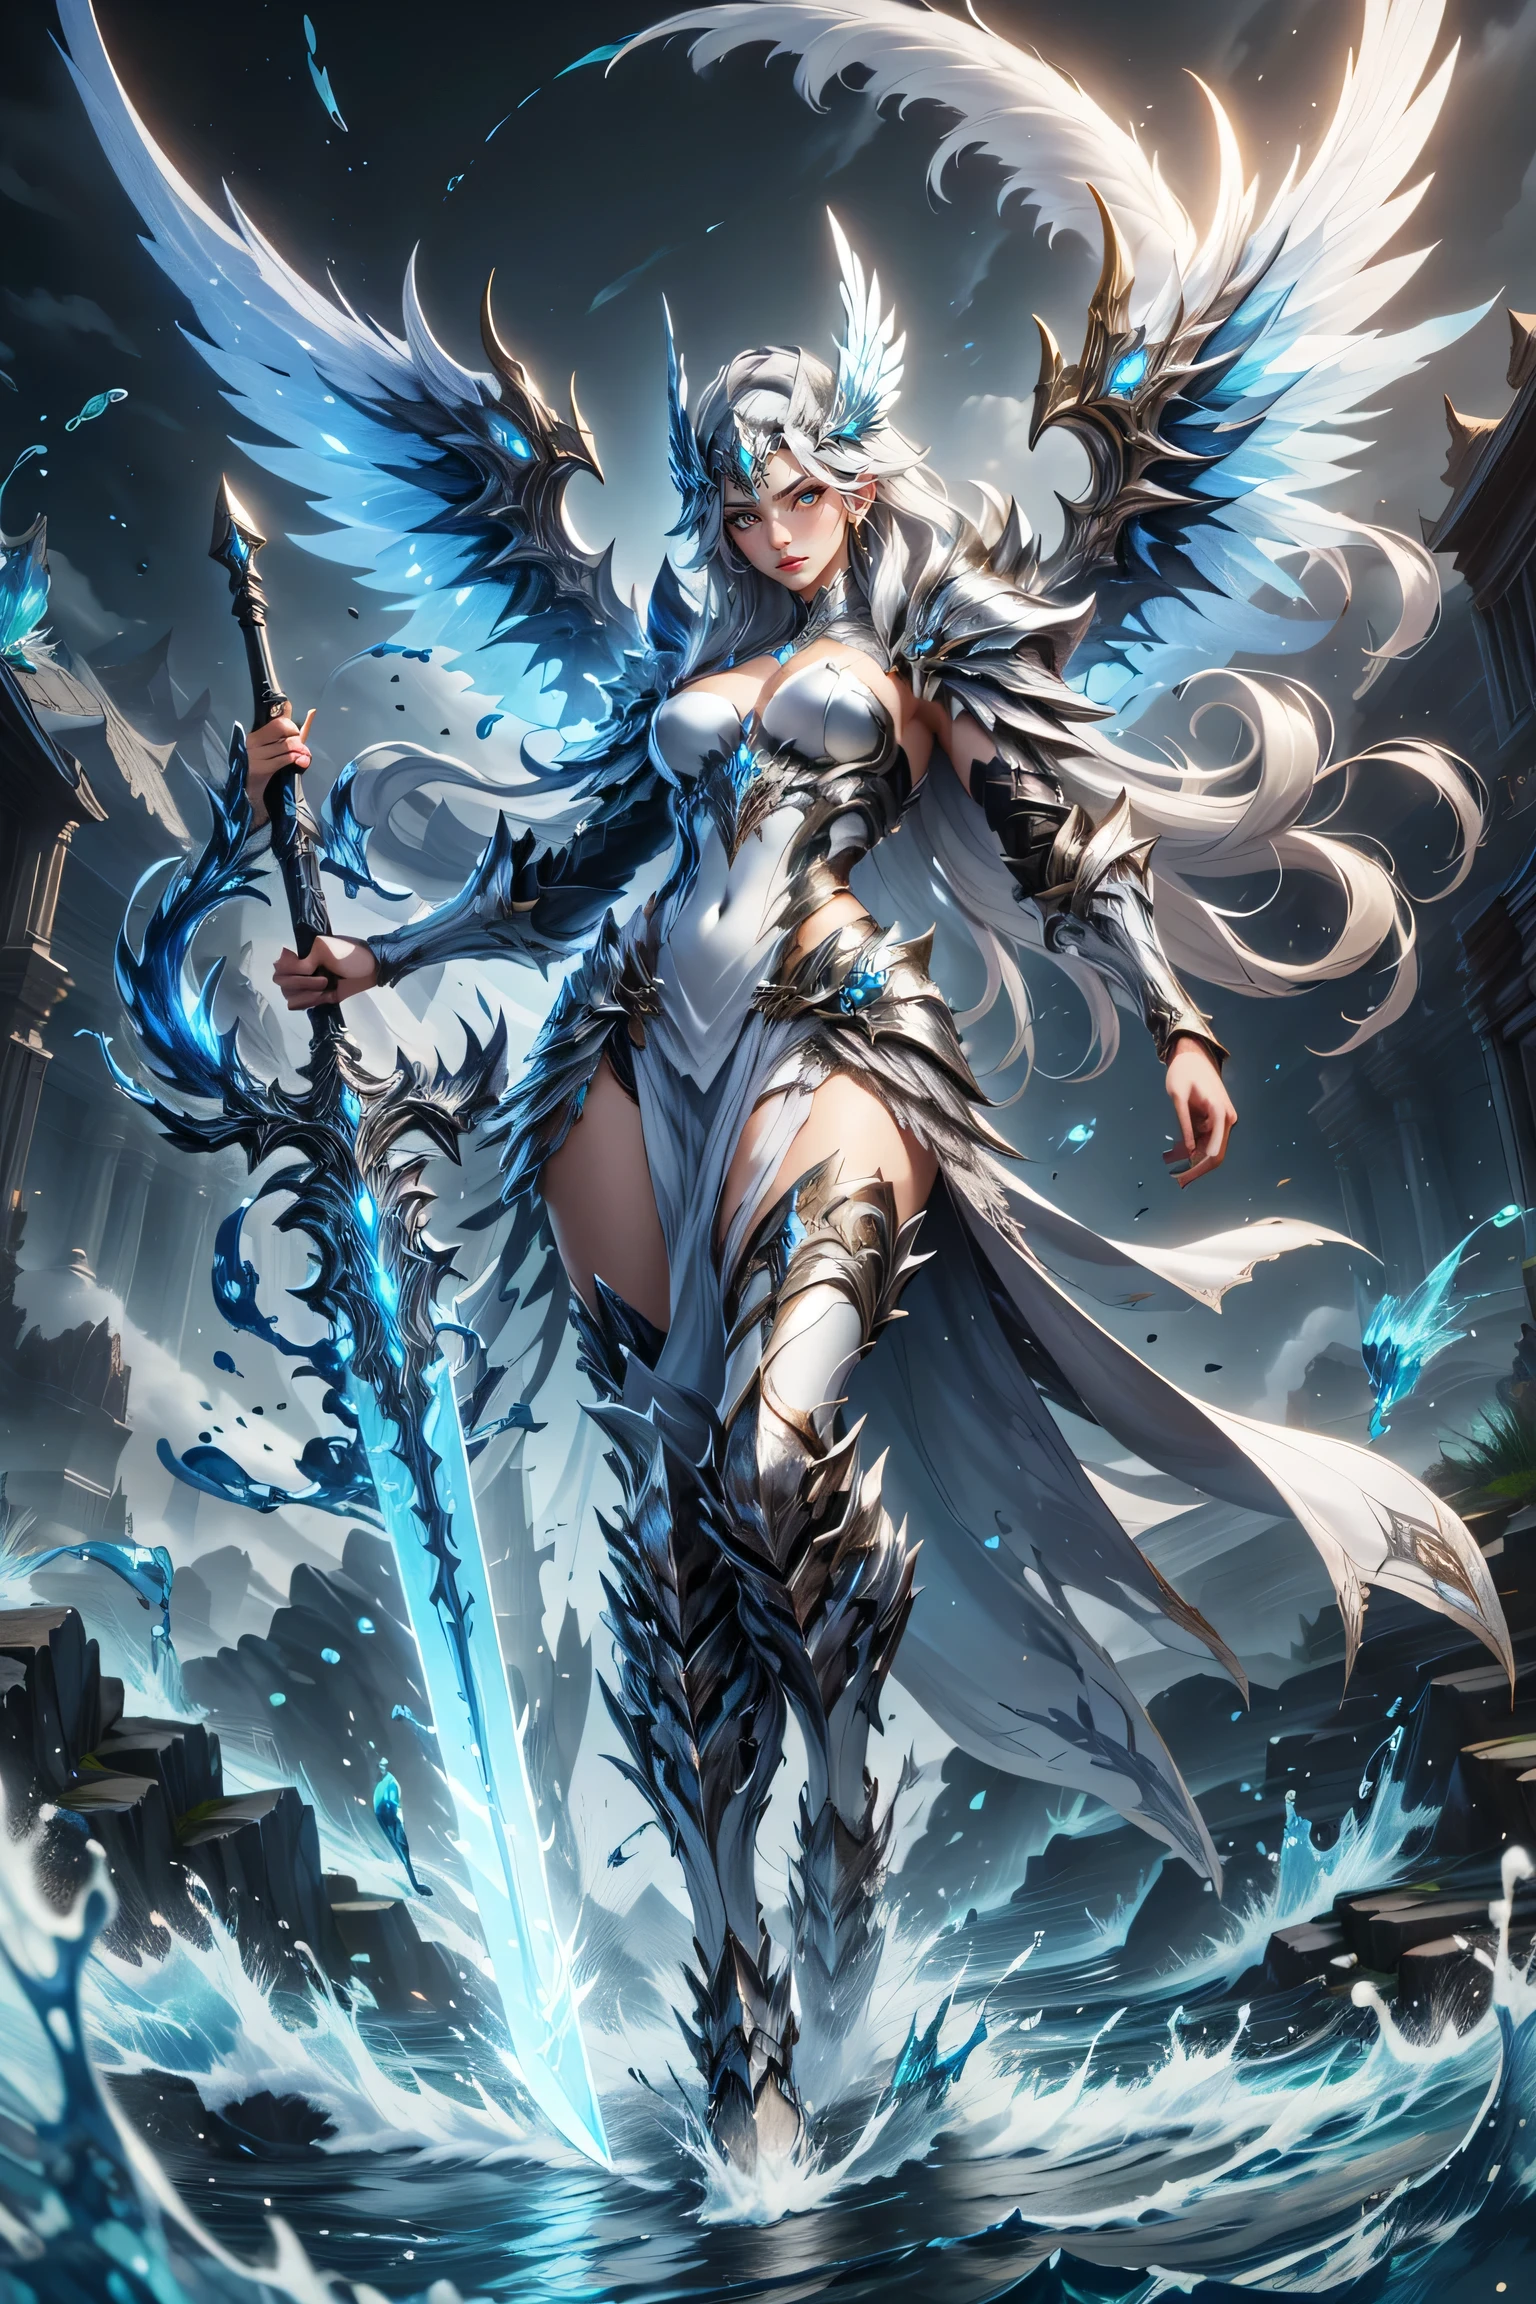 masterpiece, best quality, highres, a valkyrie floating in night sky, silver hair, cyan glowing electric eyes, very long hair, floating hair, wind, winged helmet, ray tracing, looking at viewer, open arms, elegant face, stern look, slim waist, windy scene, armor is white and gold, backlit, glowing light, goddess character, elegant, full body, flying in wind looking down at camera, wielding massive sword, beautiful face, detailed face, detailed hands, goddess of light